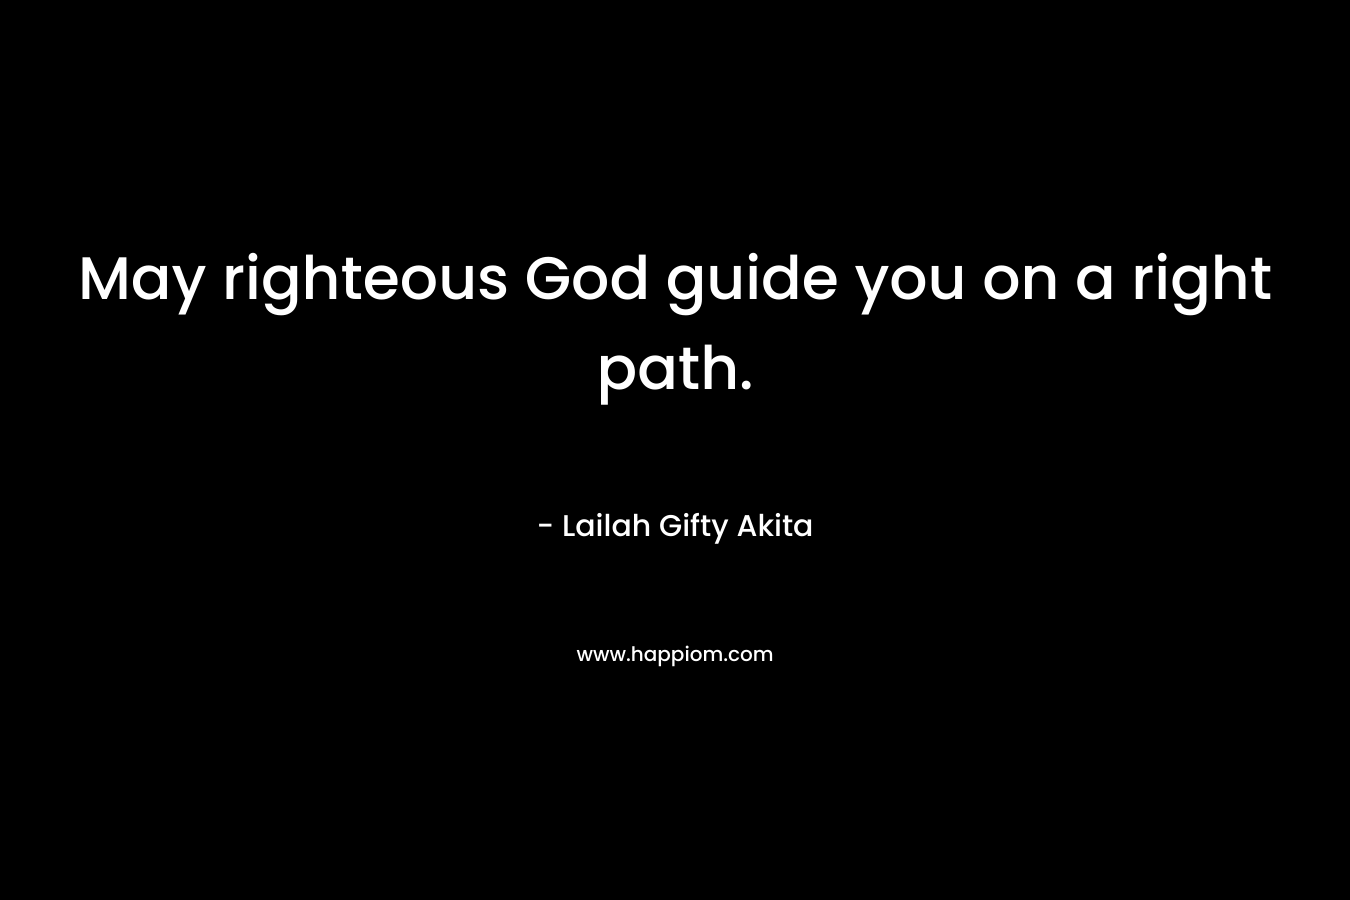 May righteous God guide you on a right path. – Lailah Gifty Akita